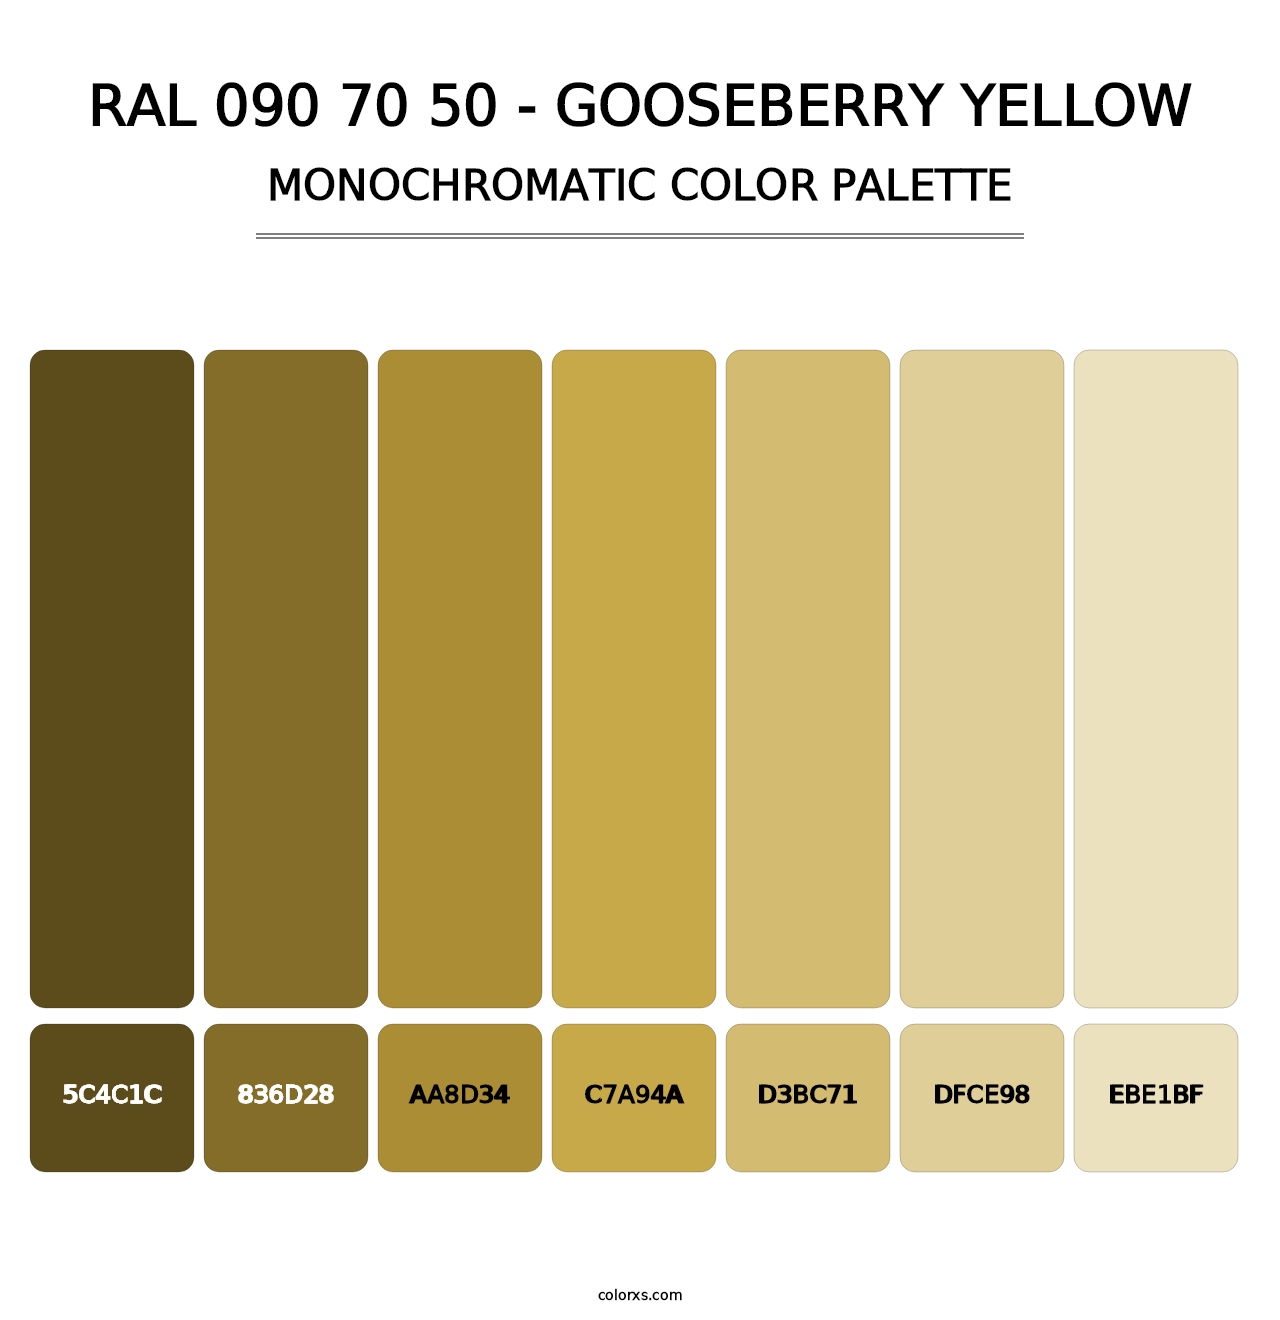 RAL 090 70 50 - Gooseberry Yellow - Monochromatic Color Palette